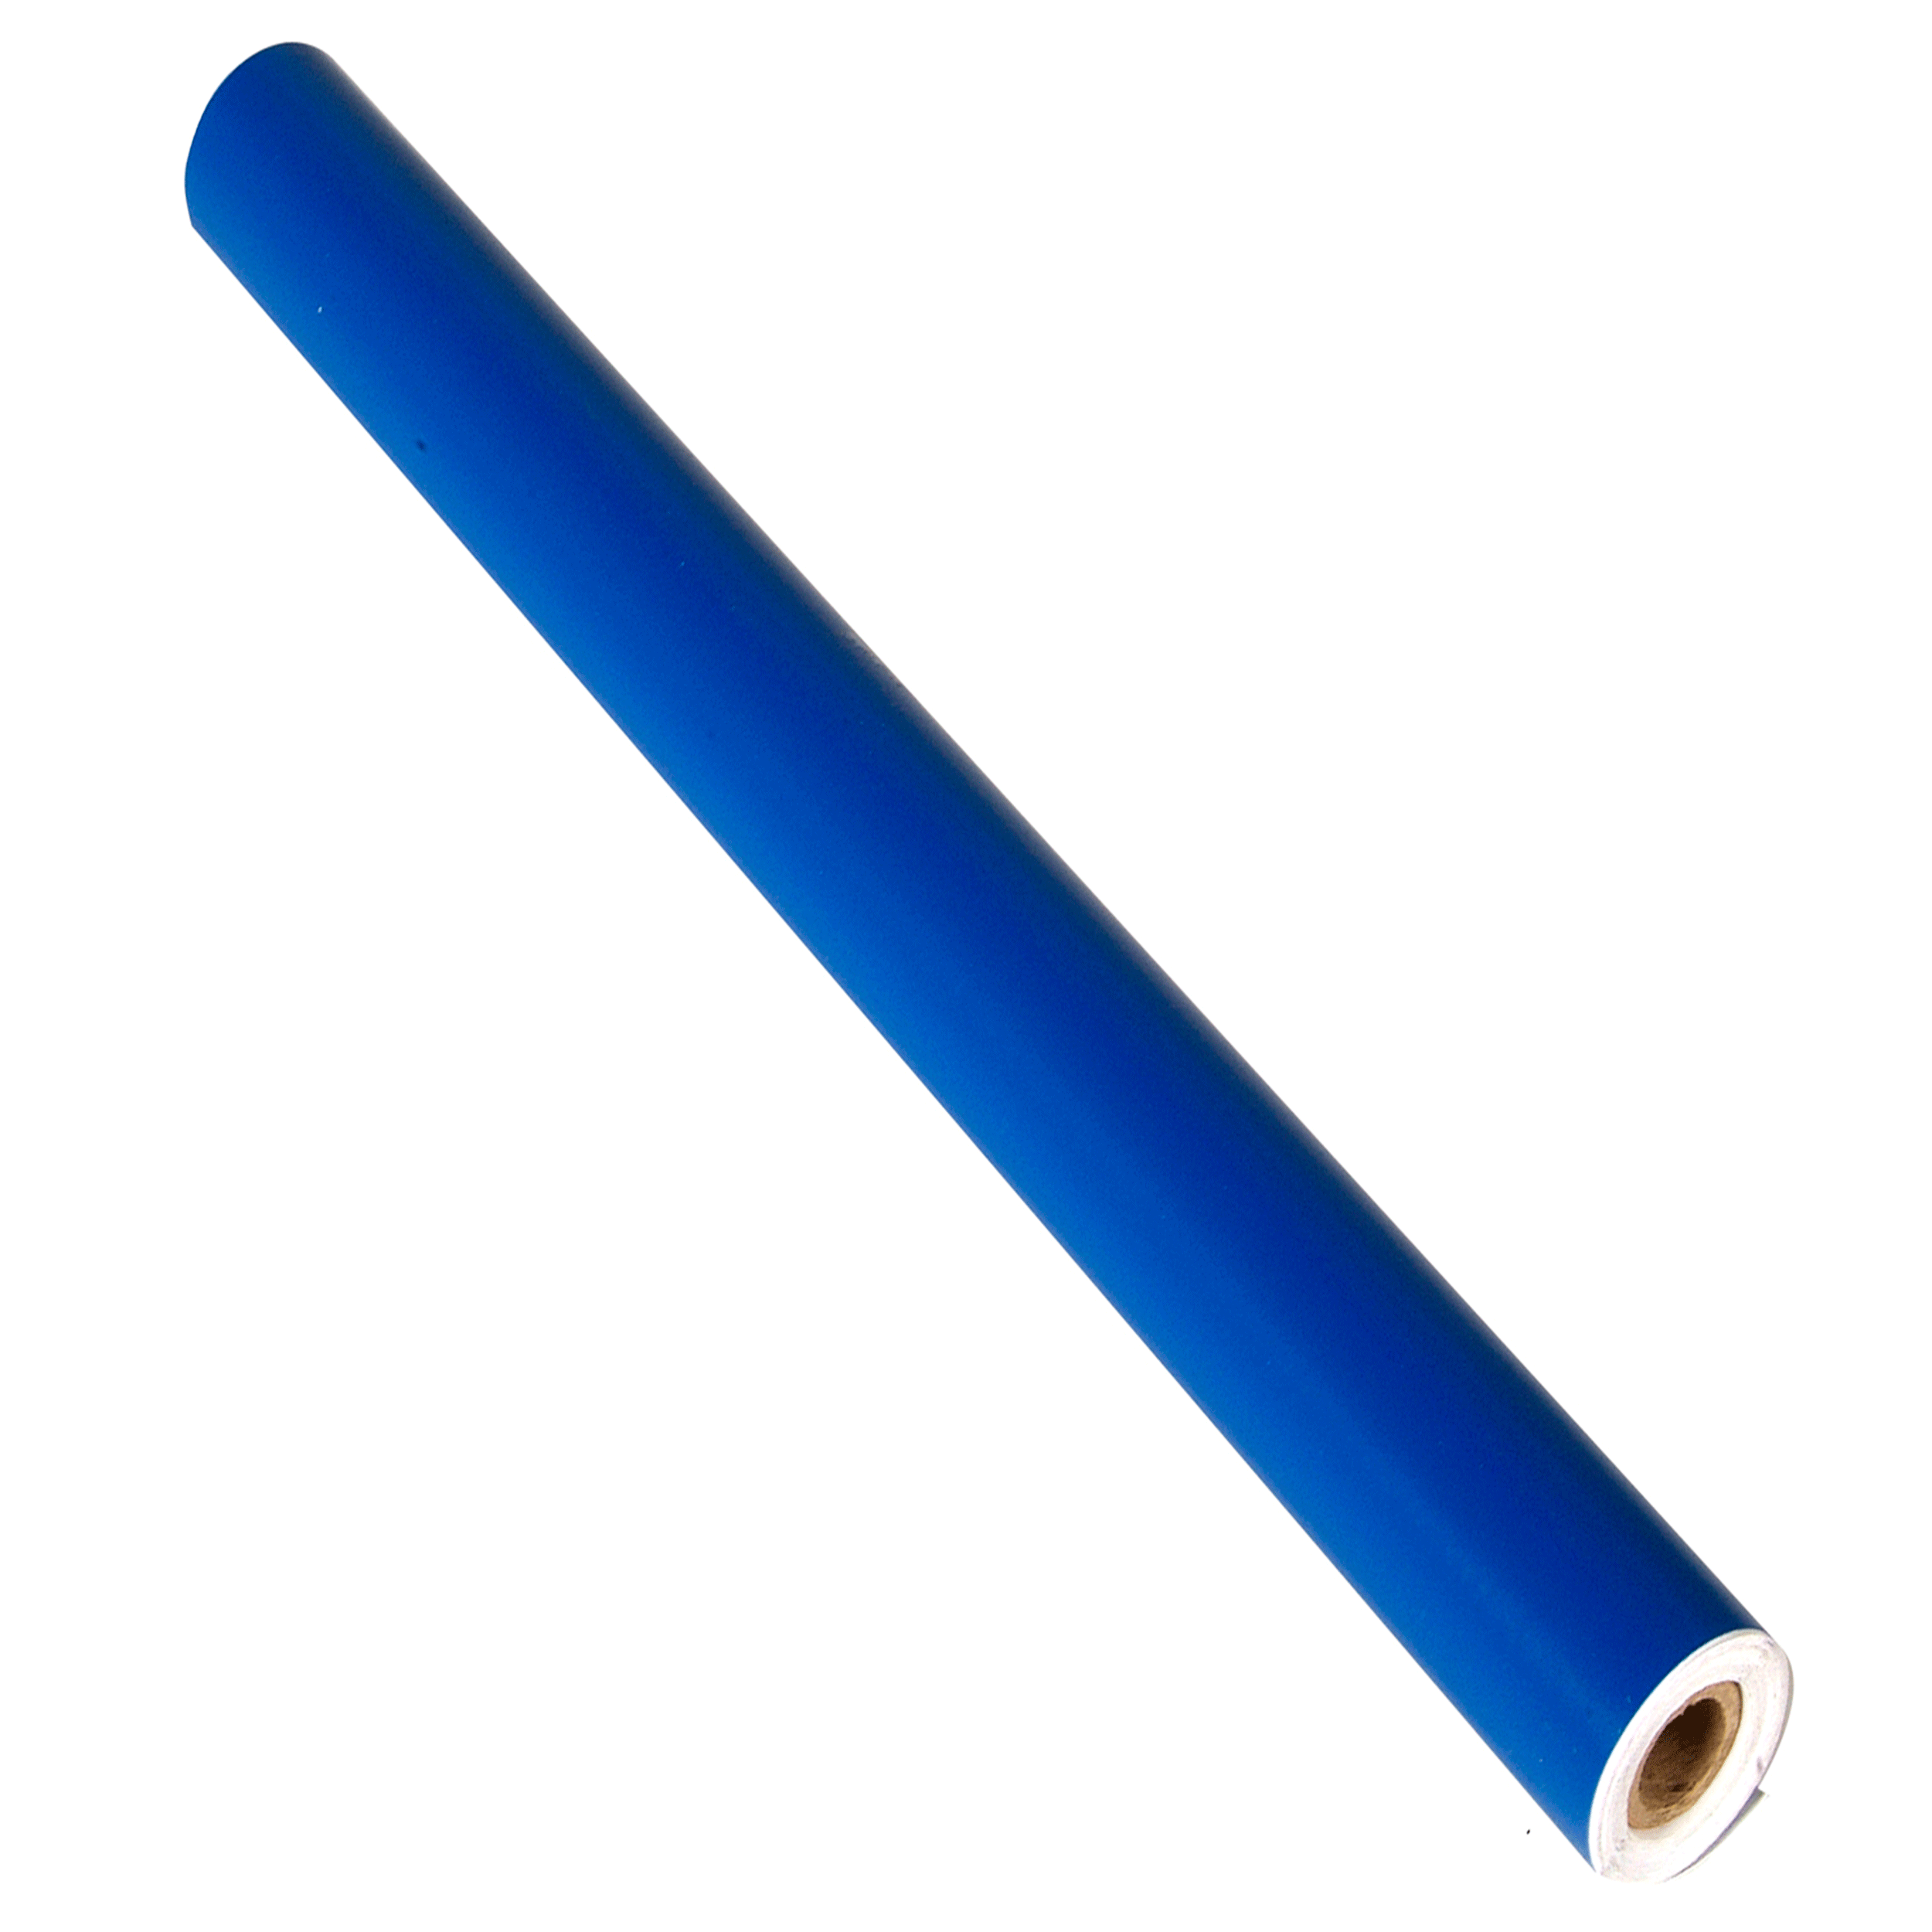 12" X 60" Shadow Board Blue Vinyl Self-adhesive Tape Roll To Silhouette And Manage Tools And Equipment